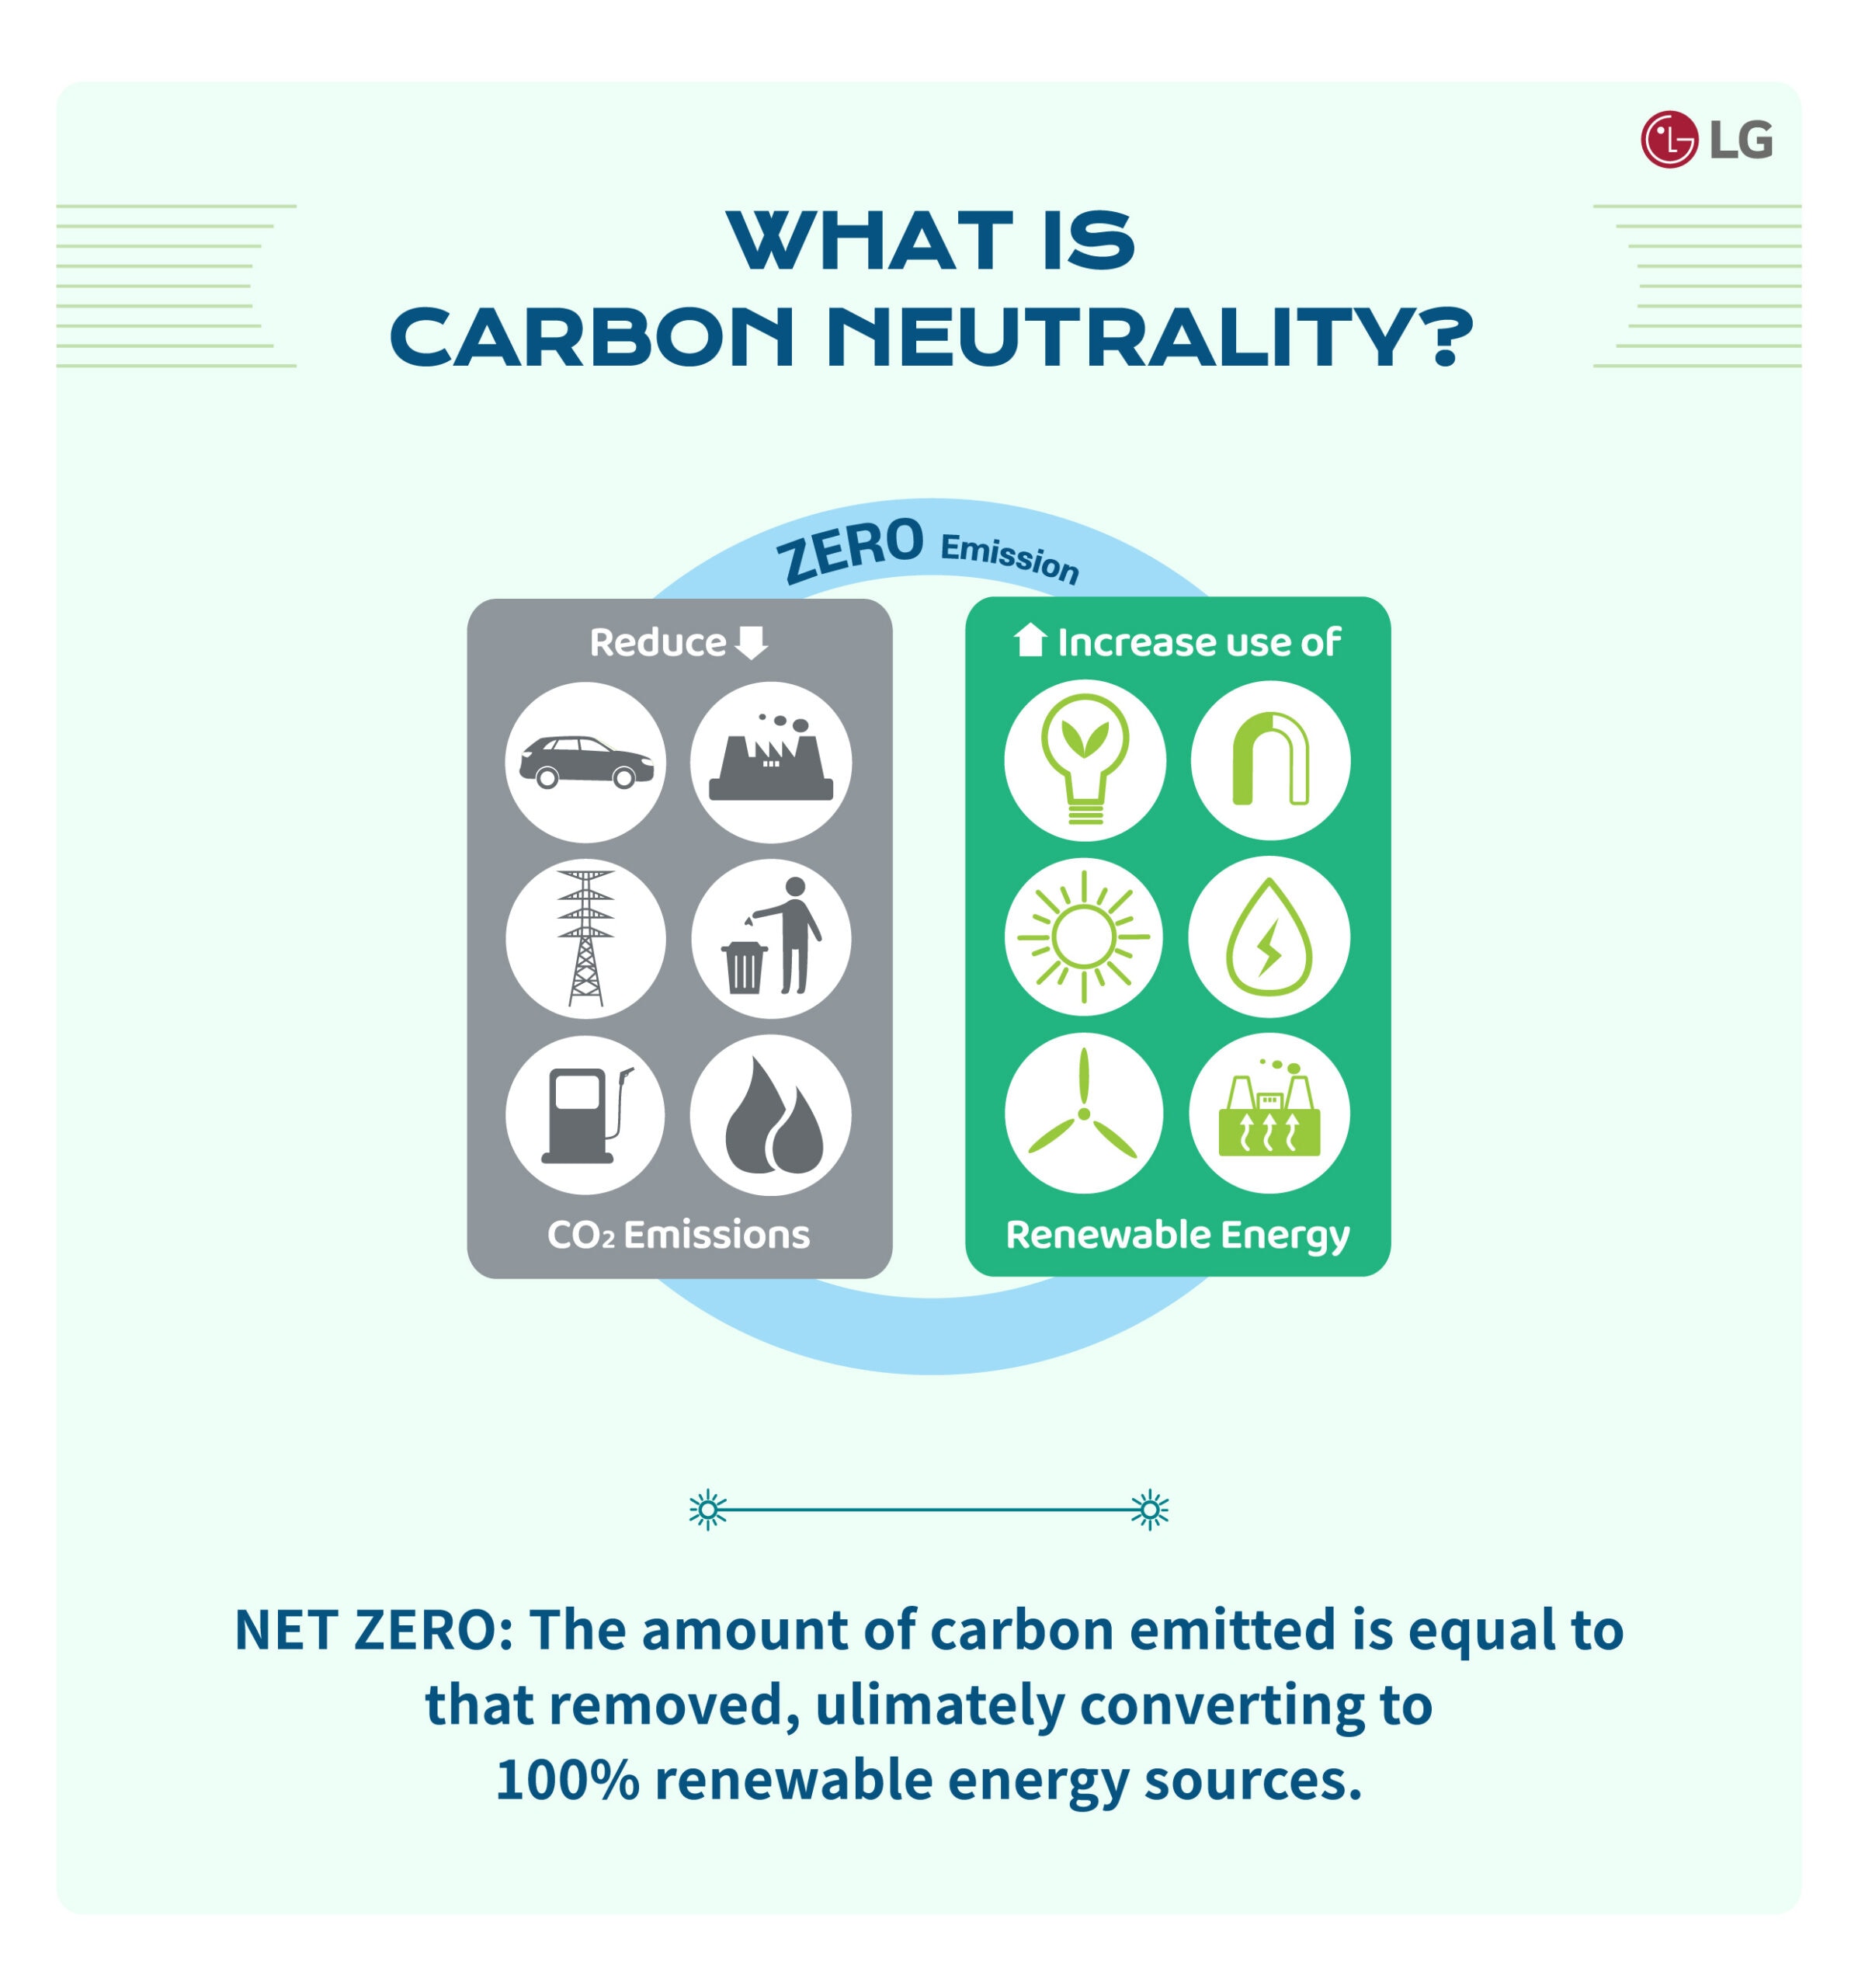 The page explaining what carbon neutrality and net zero emissions are.